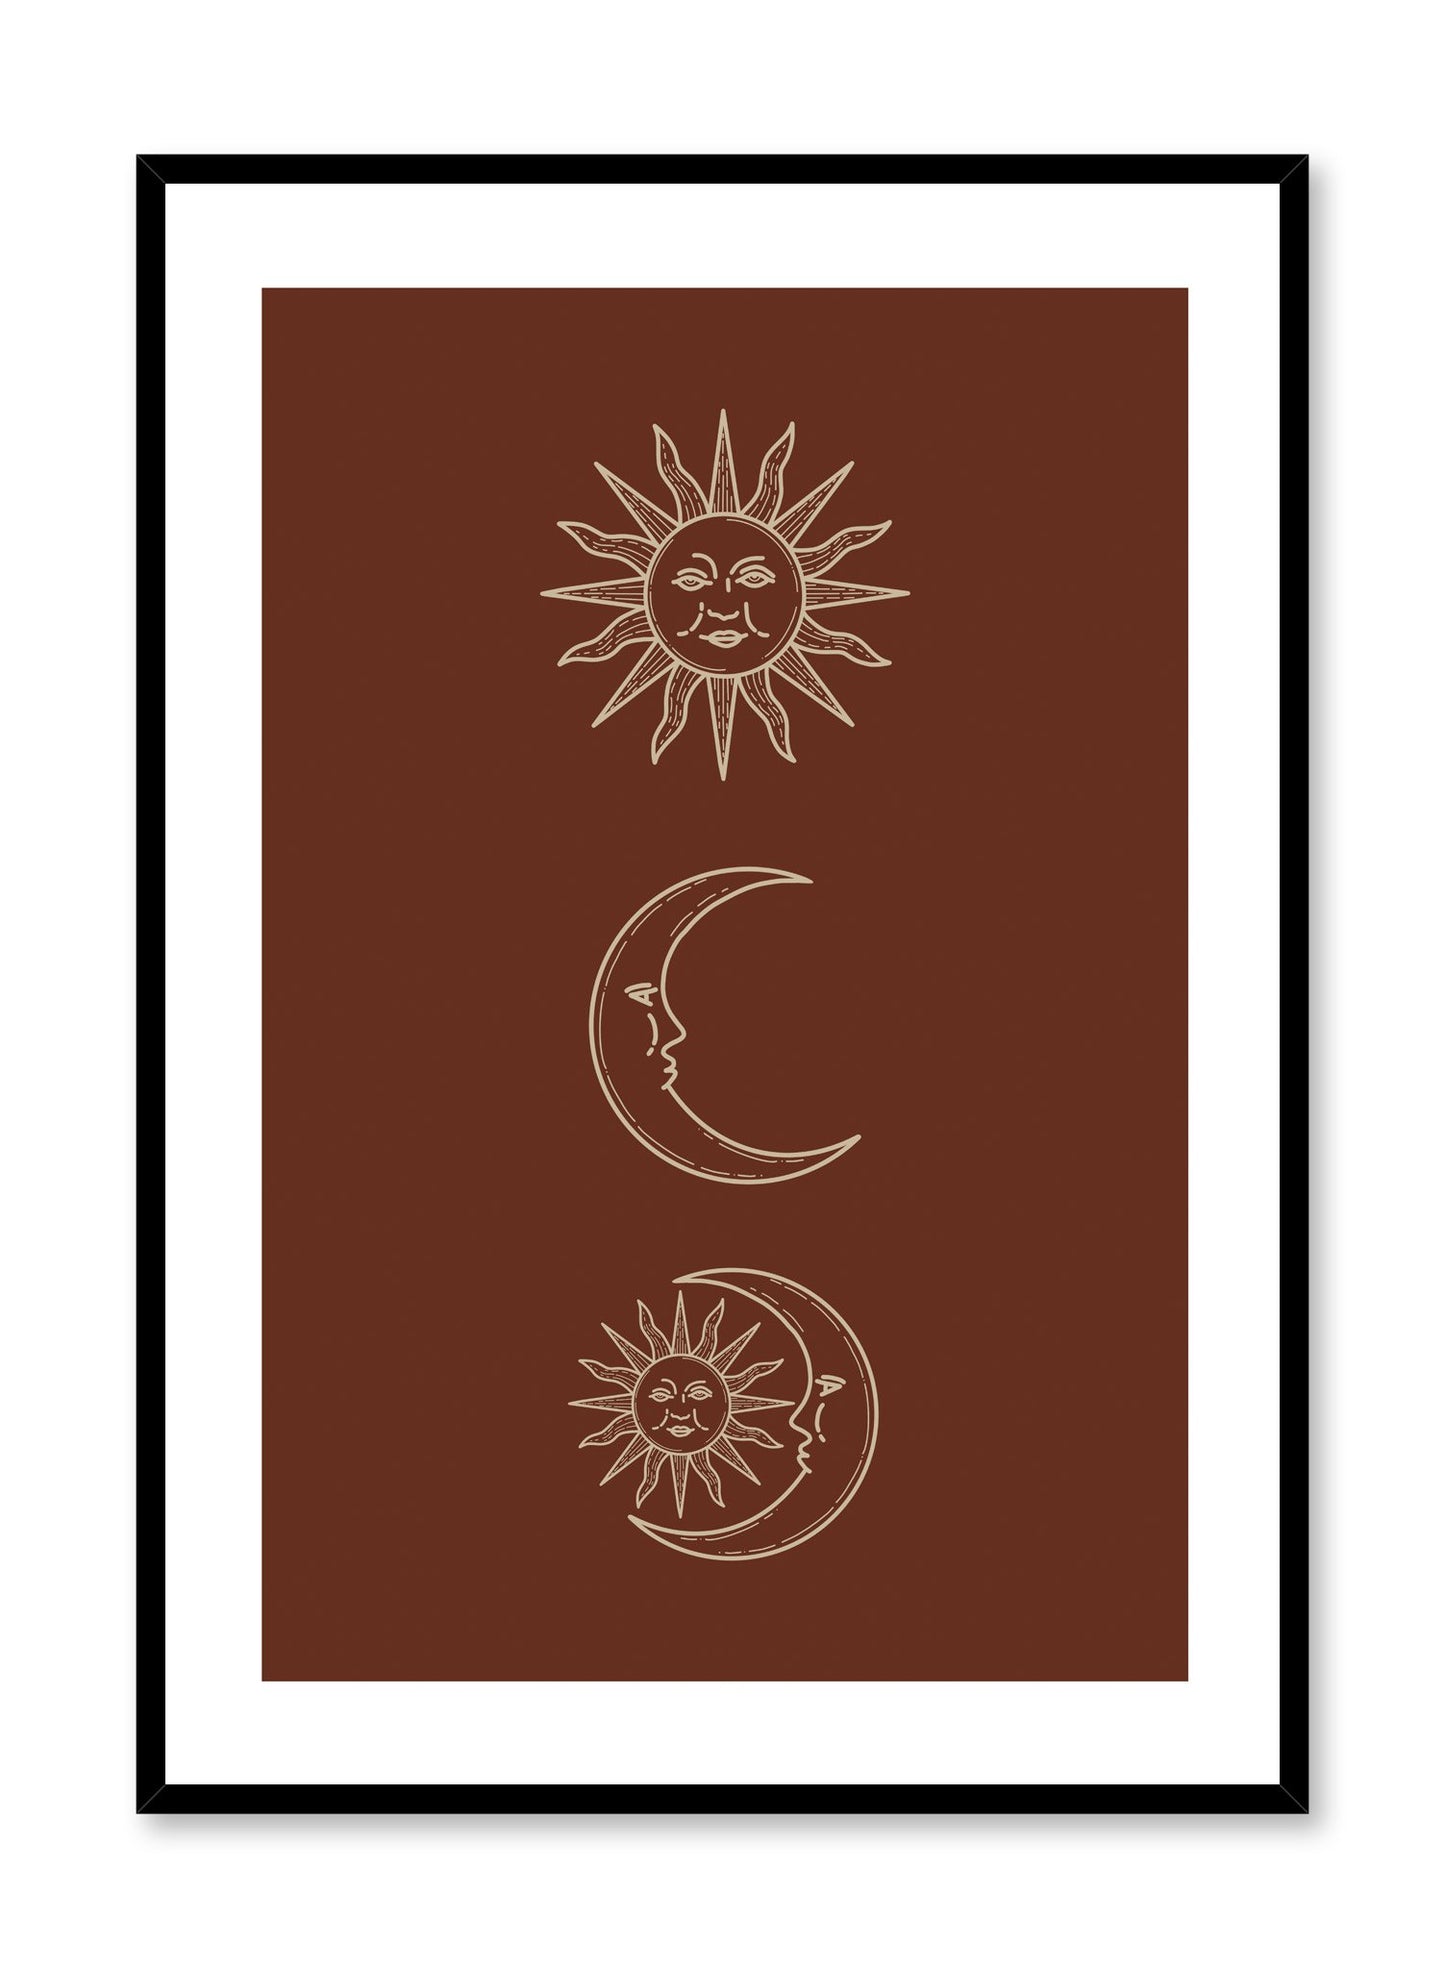 Celestial illustration poster by Opposite Wall with vintage sun and moon